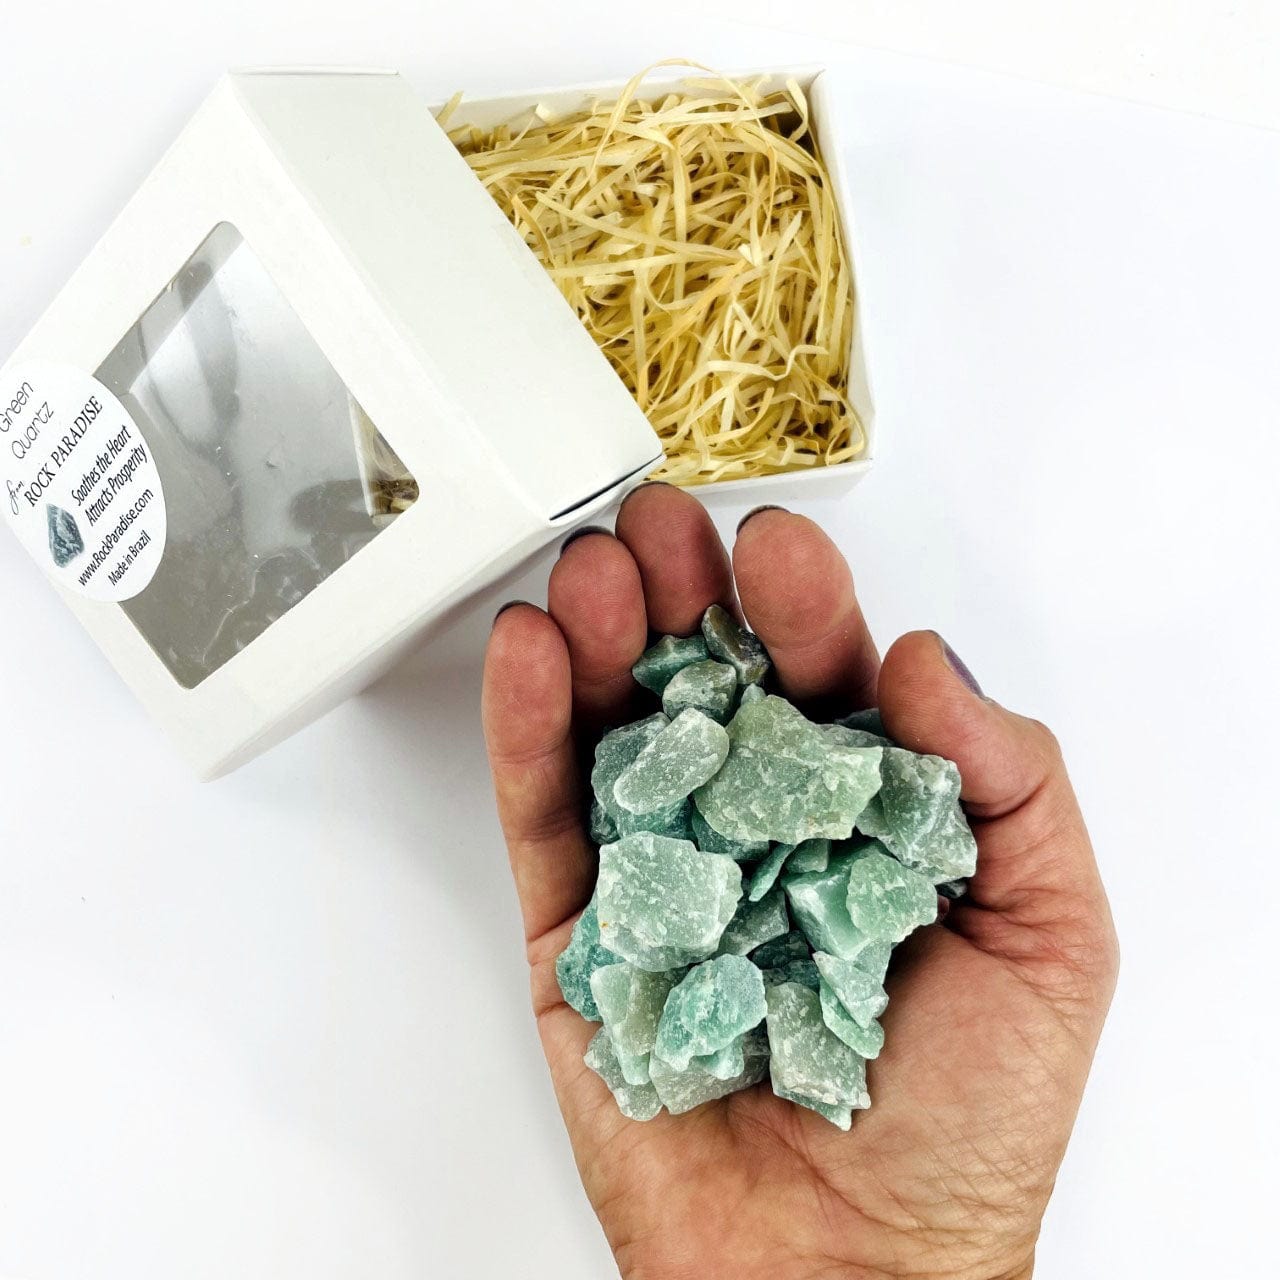 Green Quartz Chubbie Box of Stones showing in hand